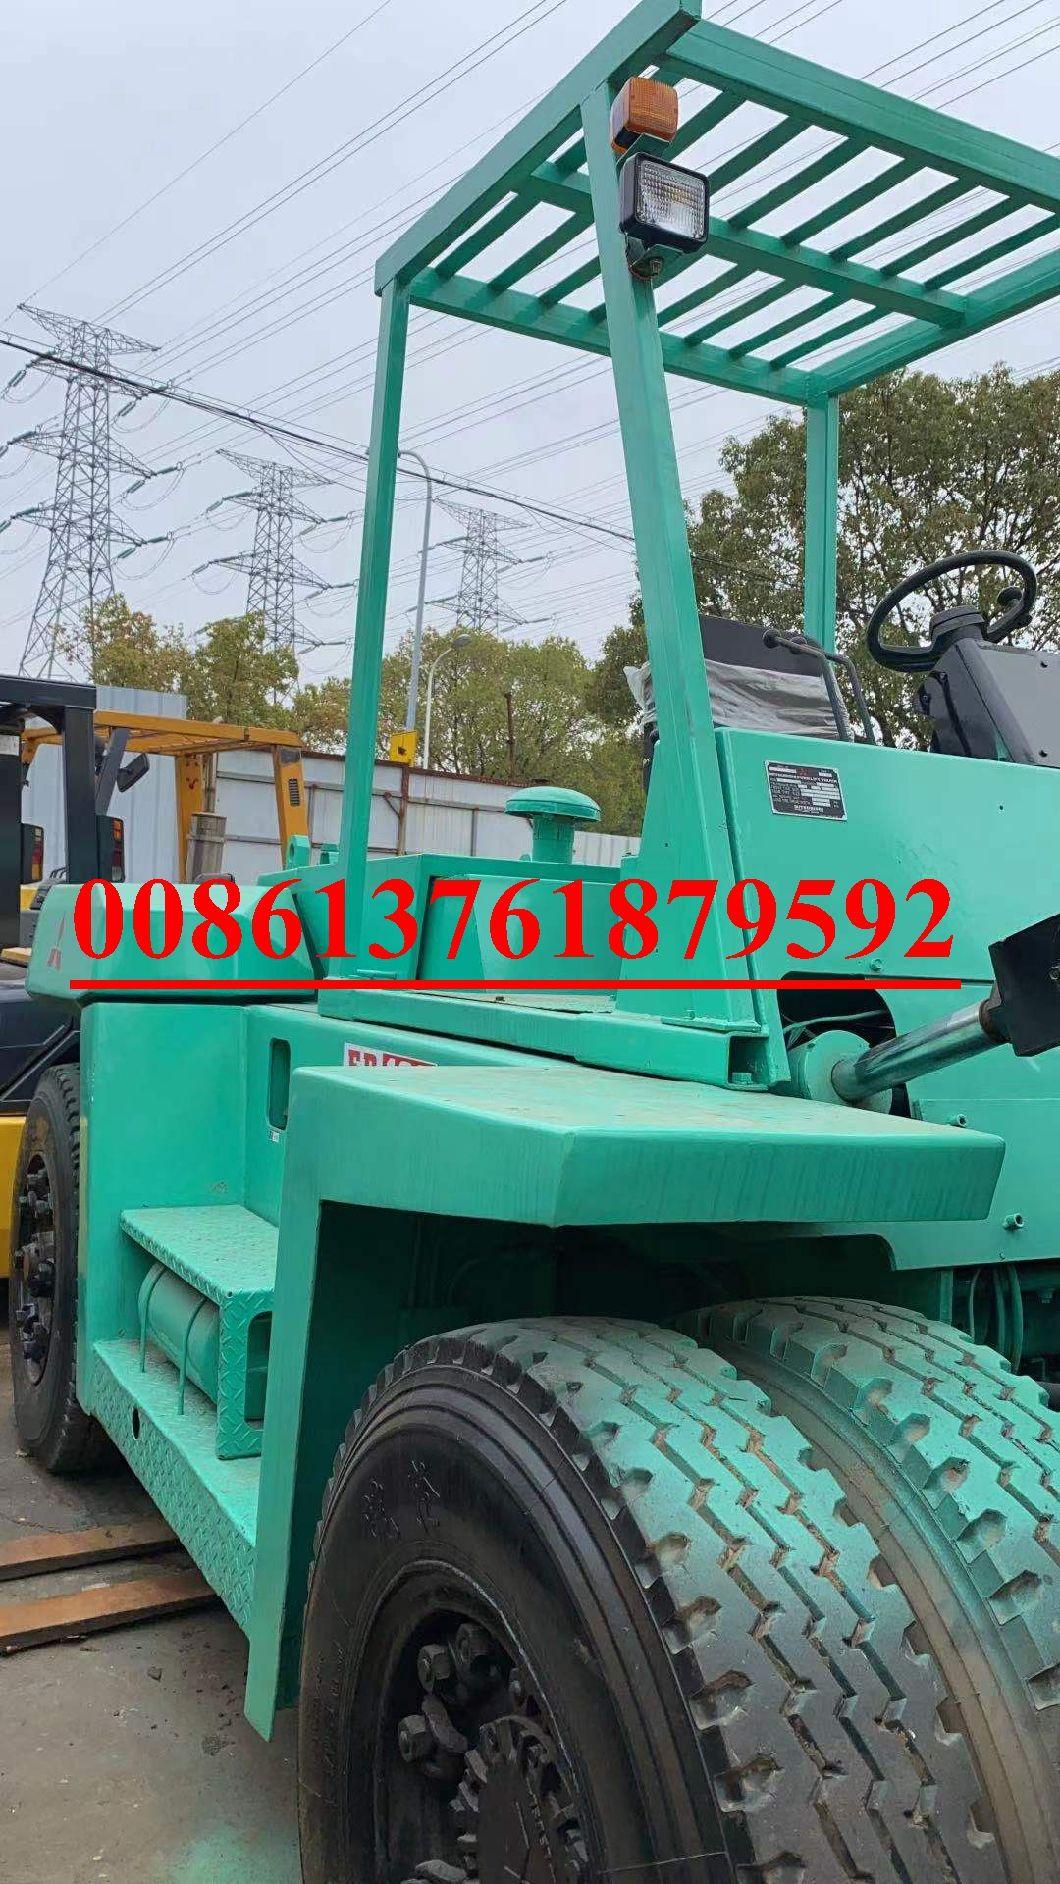 Second Hand Japan Mitsubishi Fd100 Forklift Sale in China